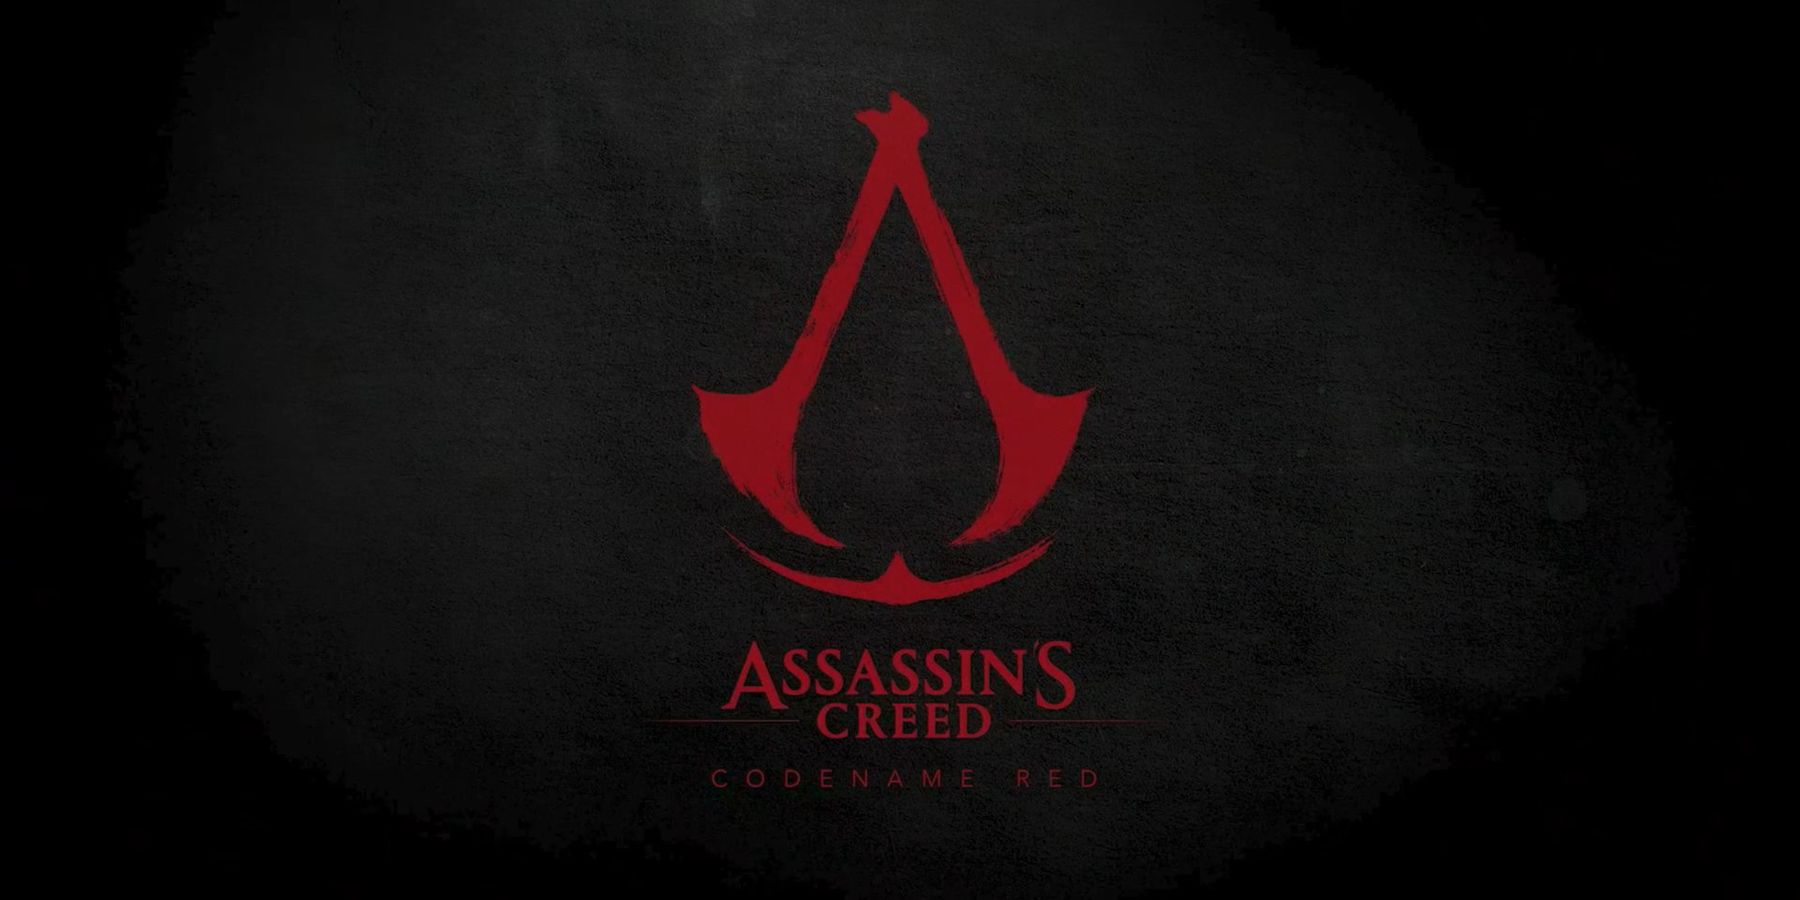 Assassins creed red дата. Клинок Assassins Creed Red. Assassins Creed Red Дата выхода. Assassin's Creed Codename Red. Assassin's Creed: Codename Hexe.